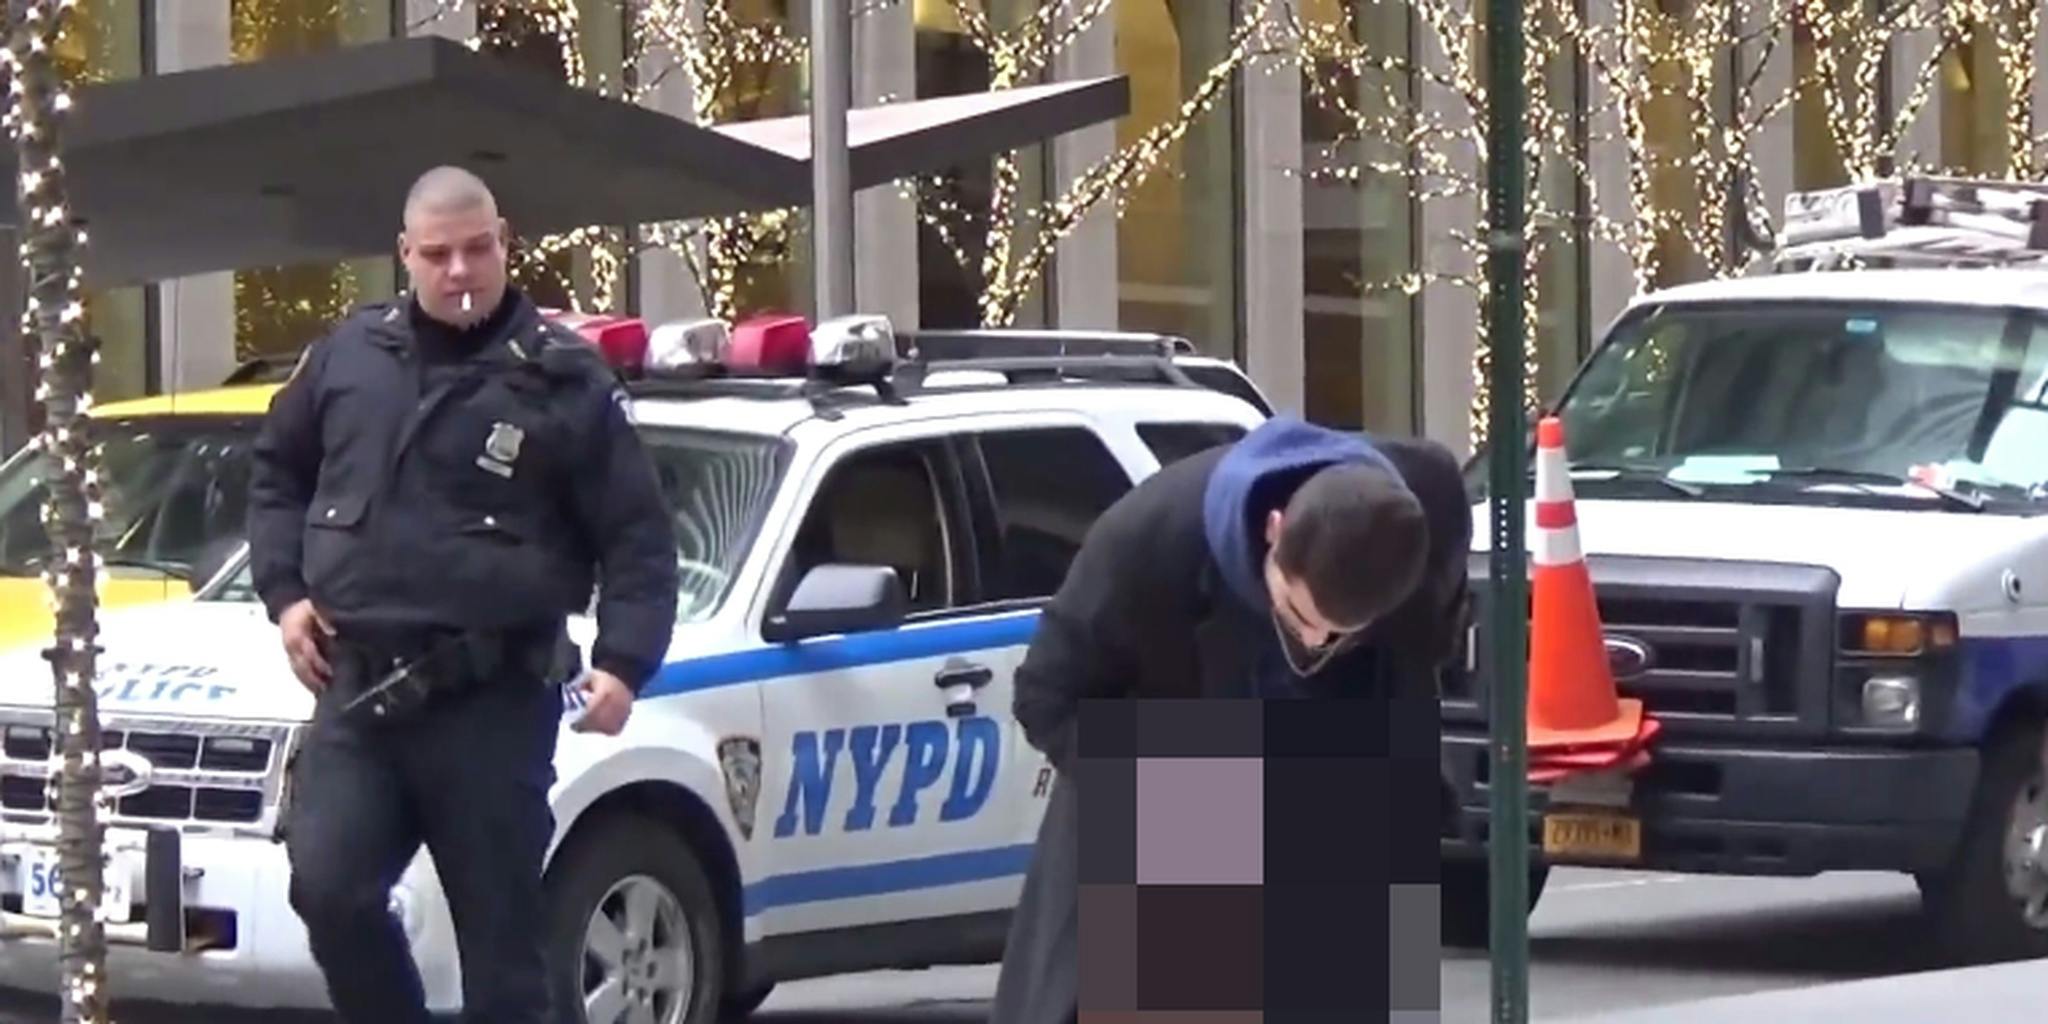 A prankster went around NYC and jerked off in front of cops.